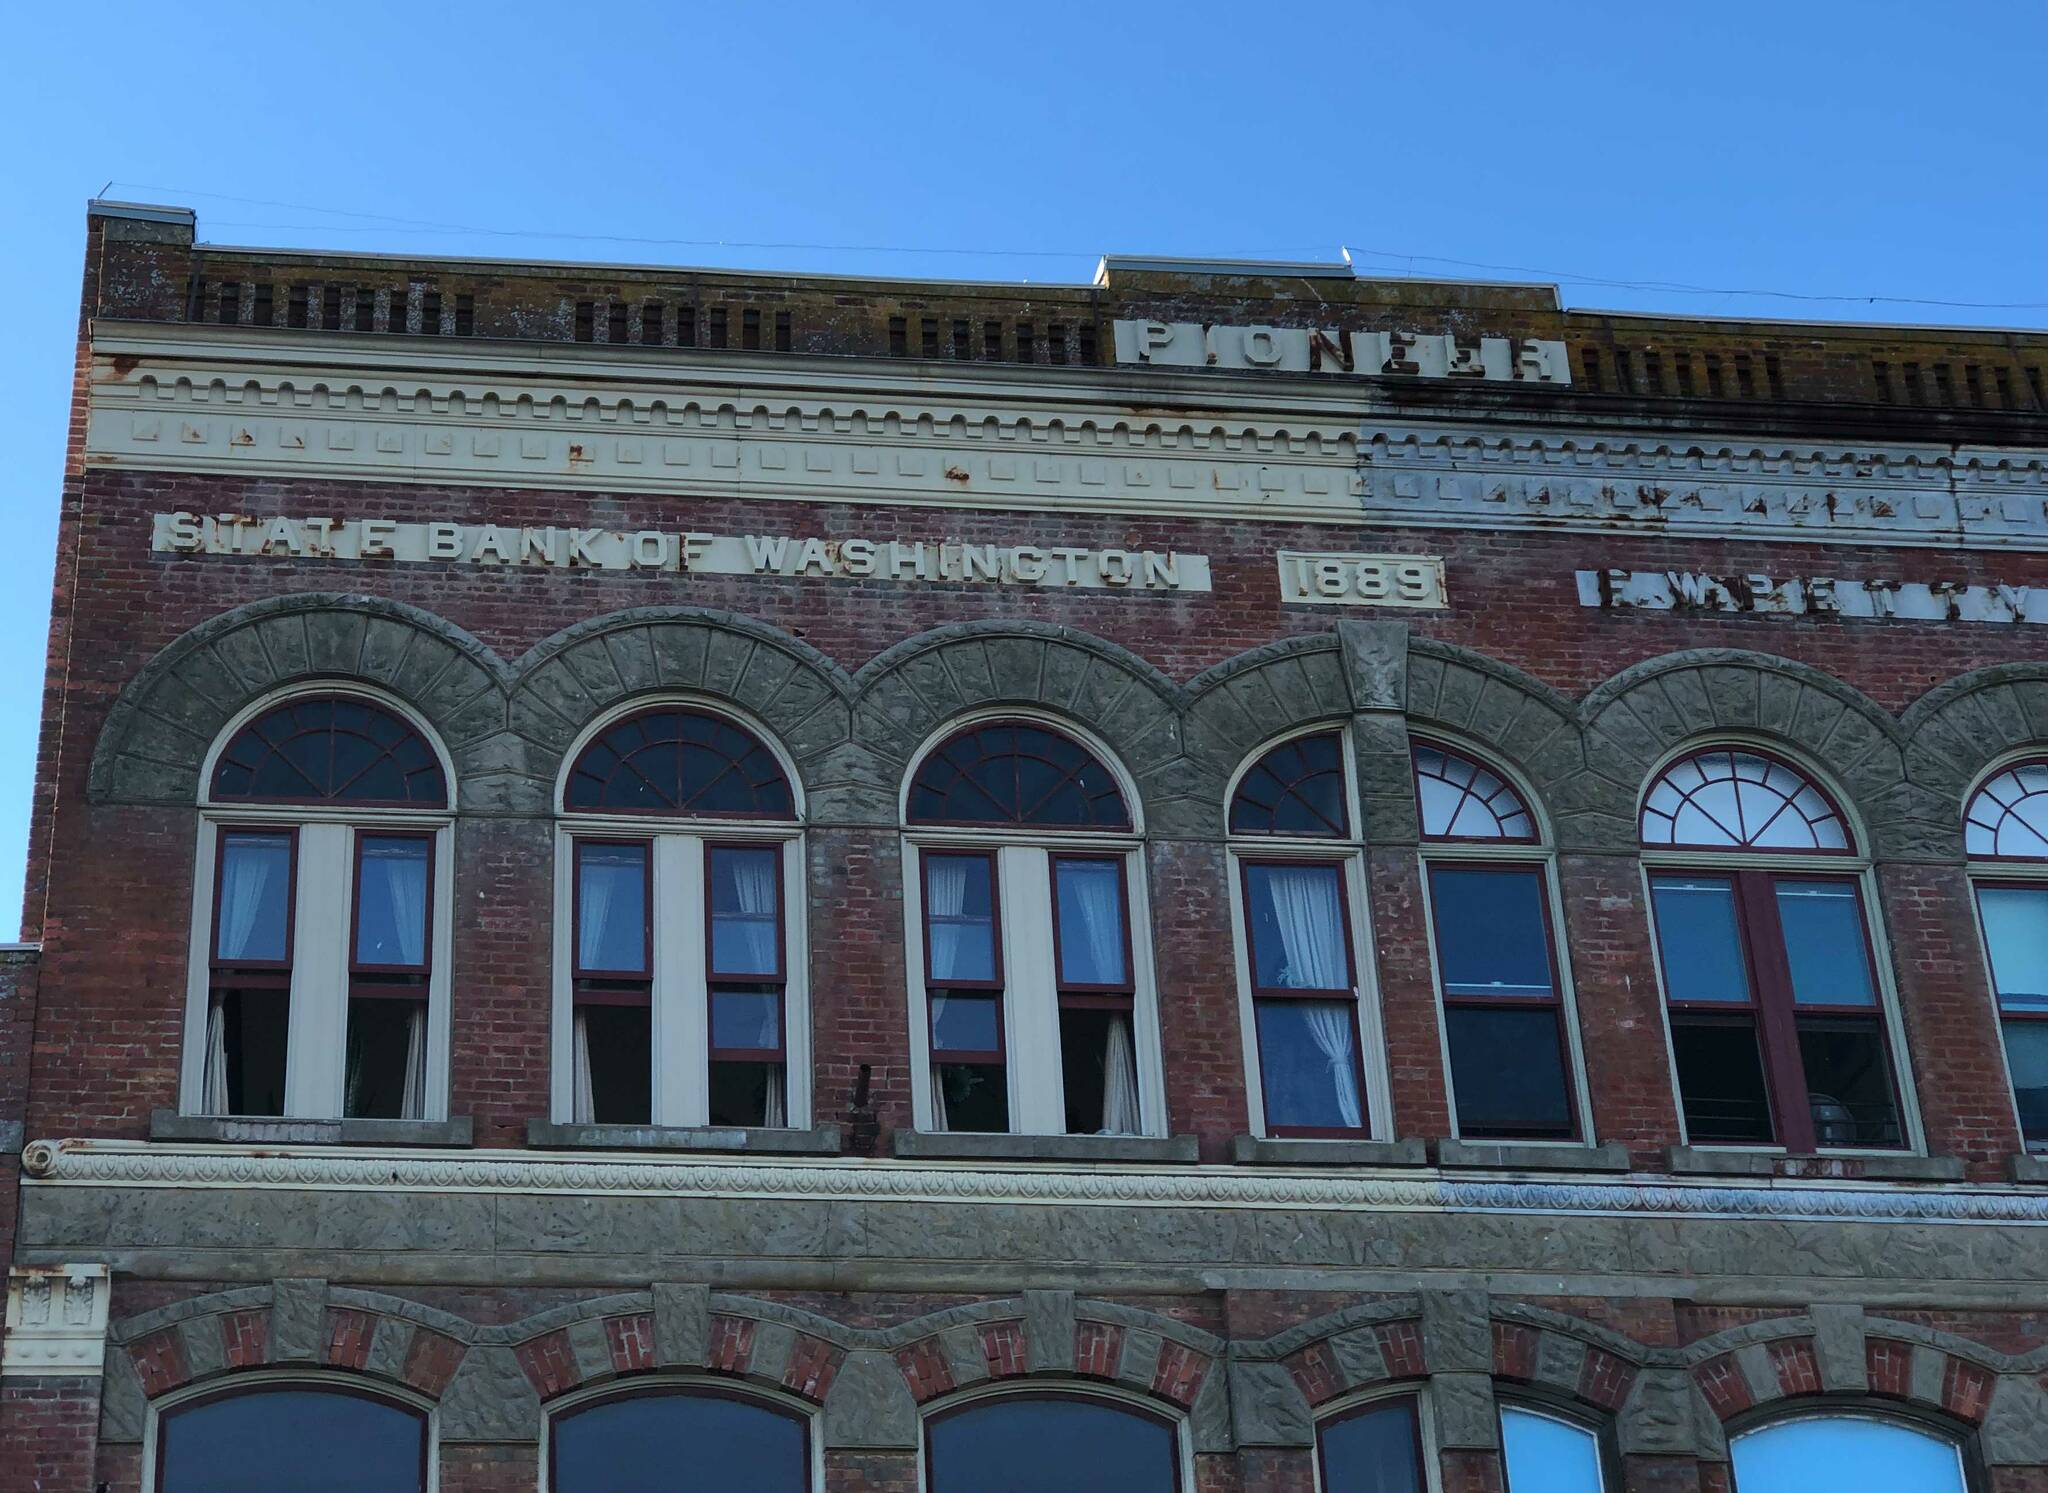 The idea of a state bank is not new. This 1889 Port Townsend building has “State Bank of Washington” engraved on its front. (Photo by Morf Morford)